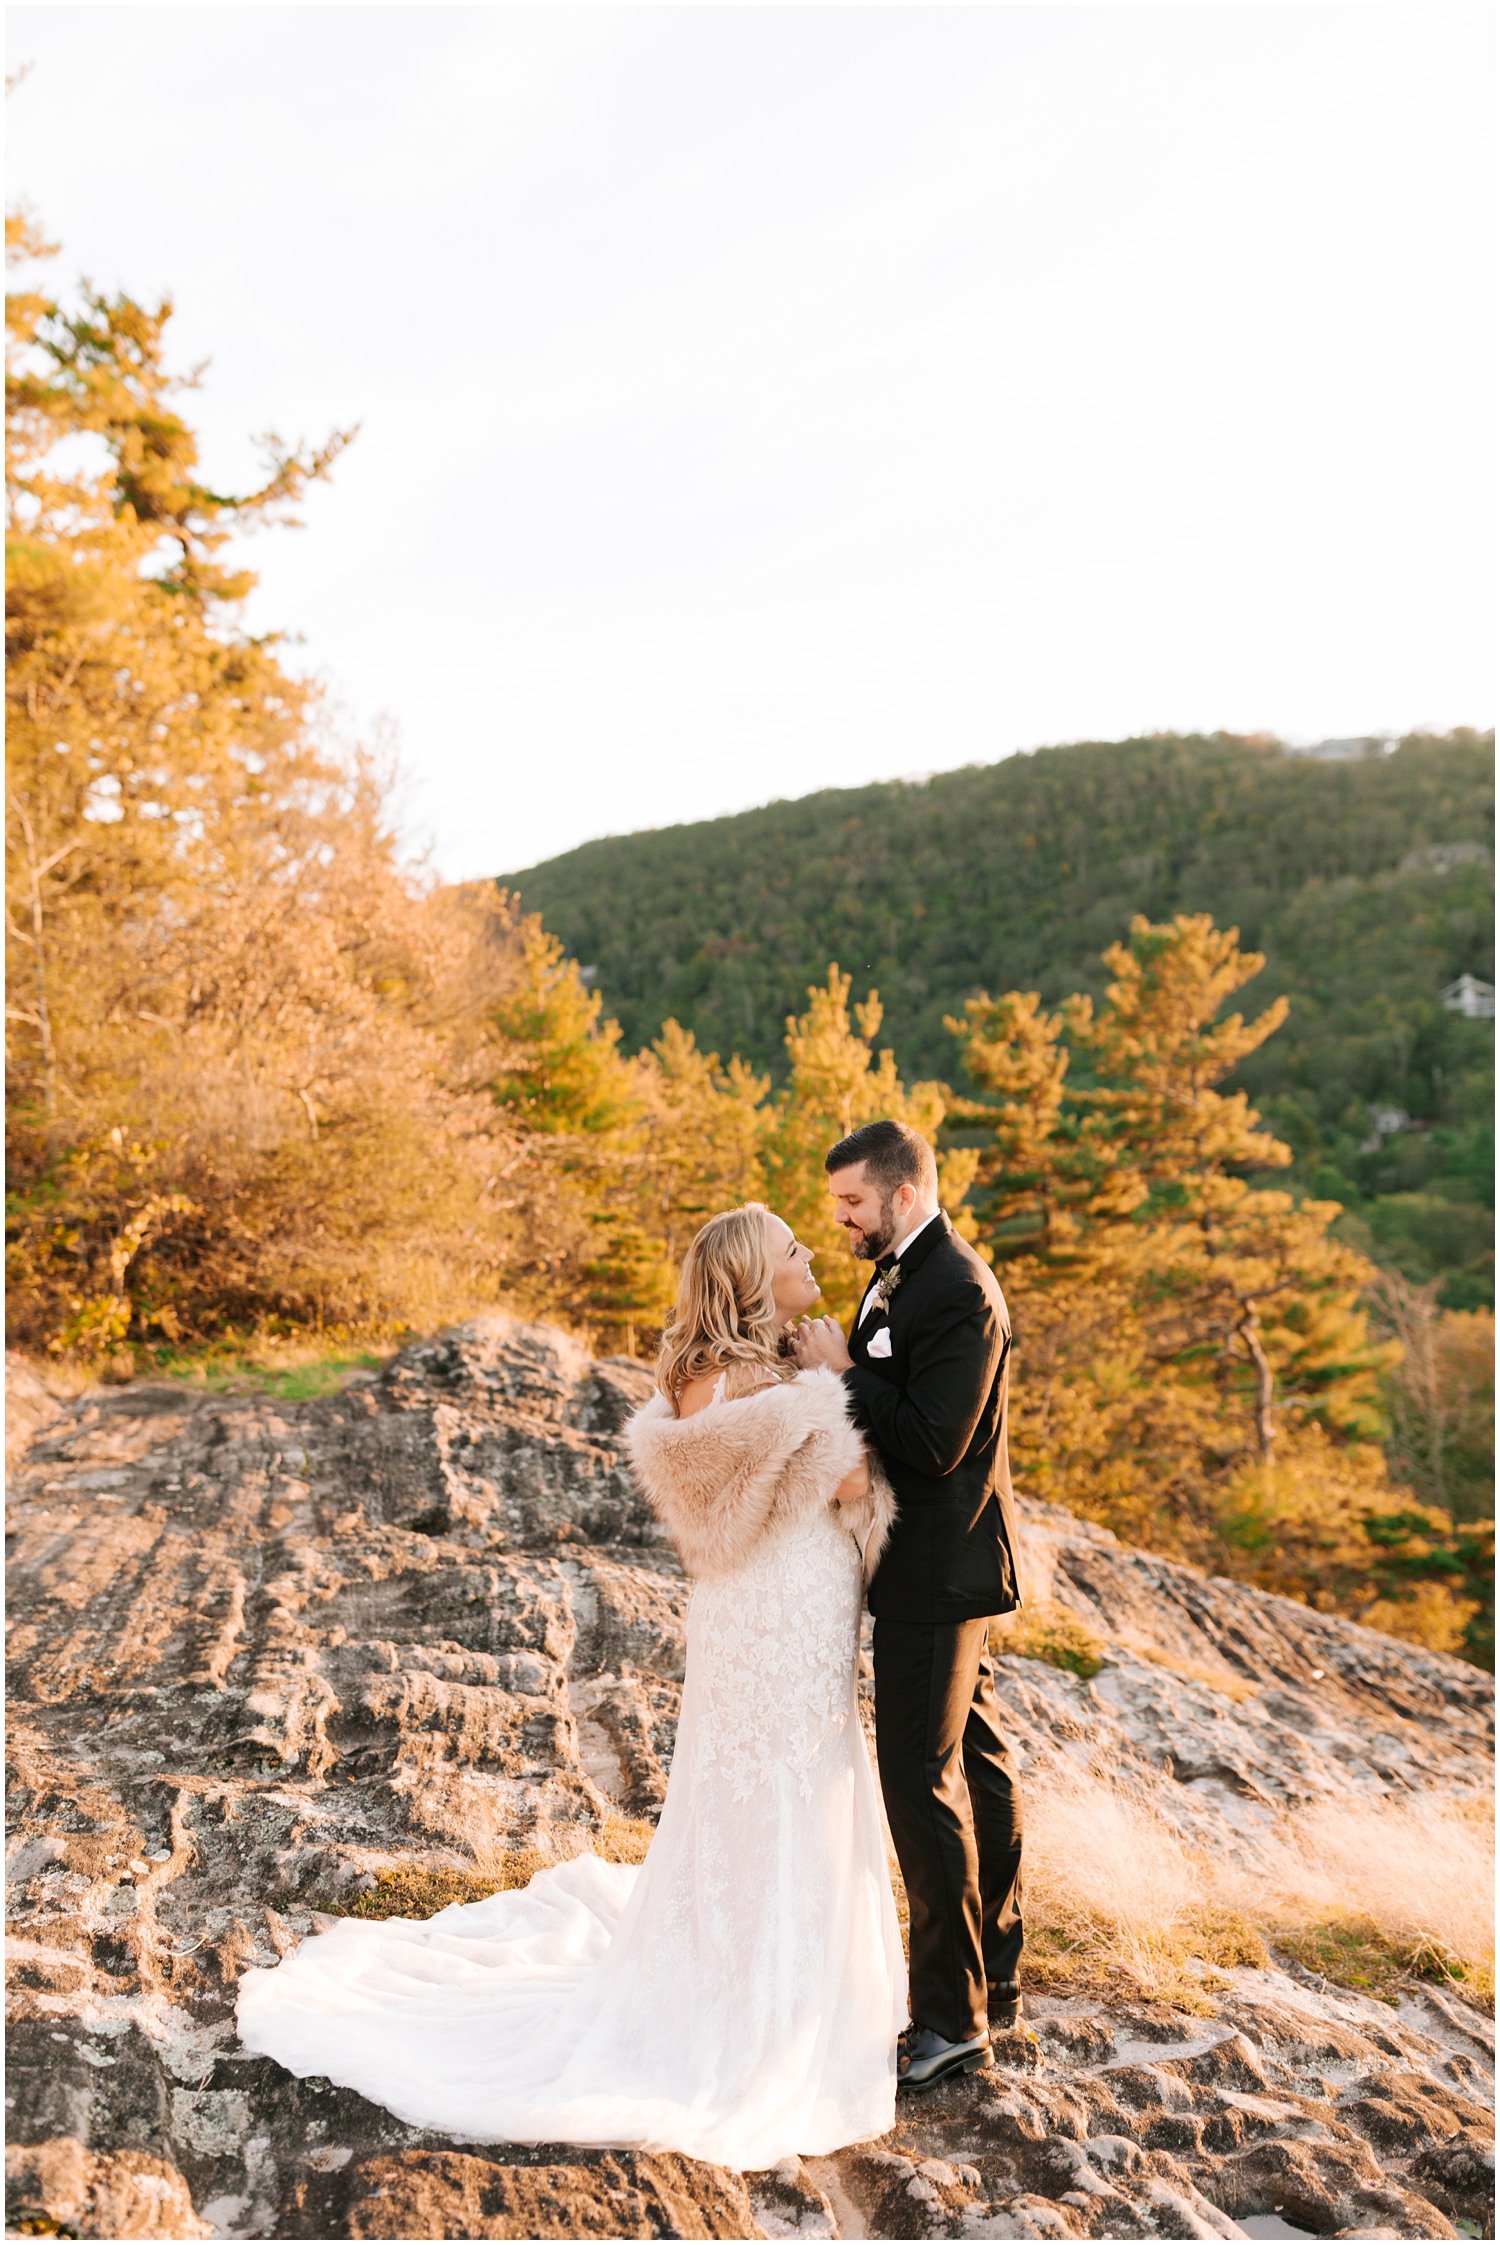 romantic fall wedding portraits in North Carolina on mountaintop by Chelsea Renay